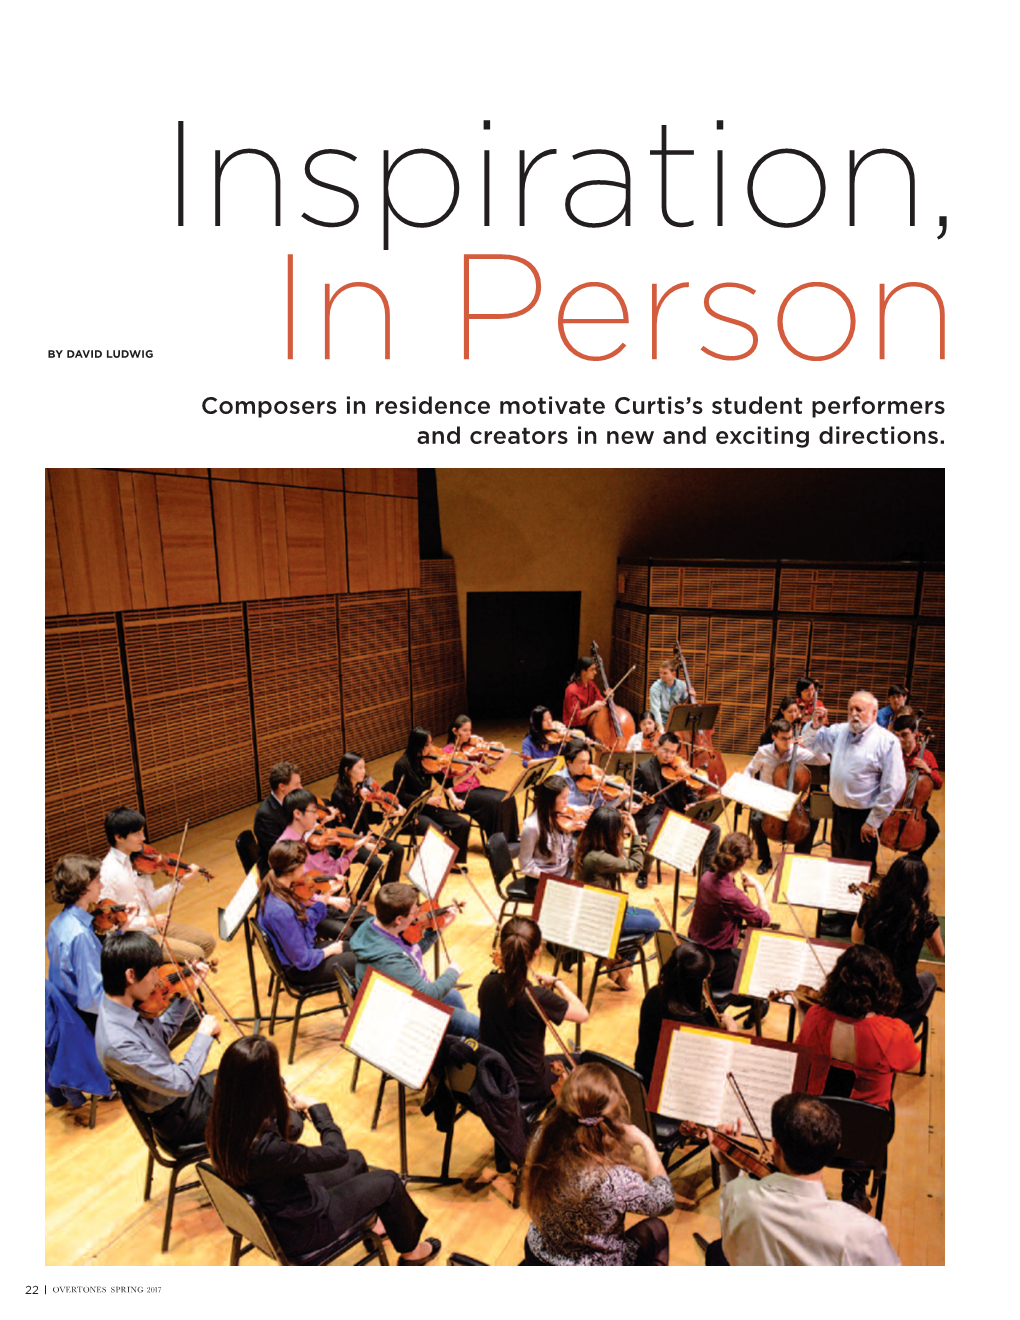 Composers in Residence Motivate Curtis's Student Performers And